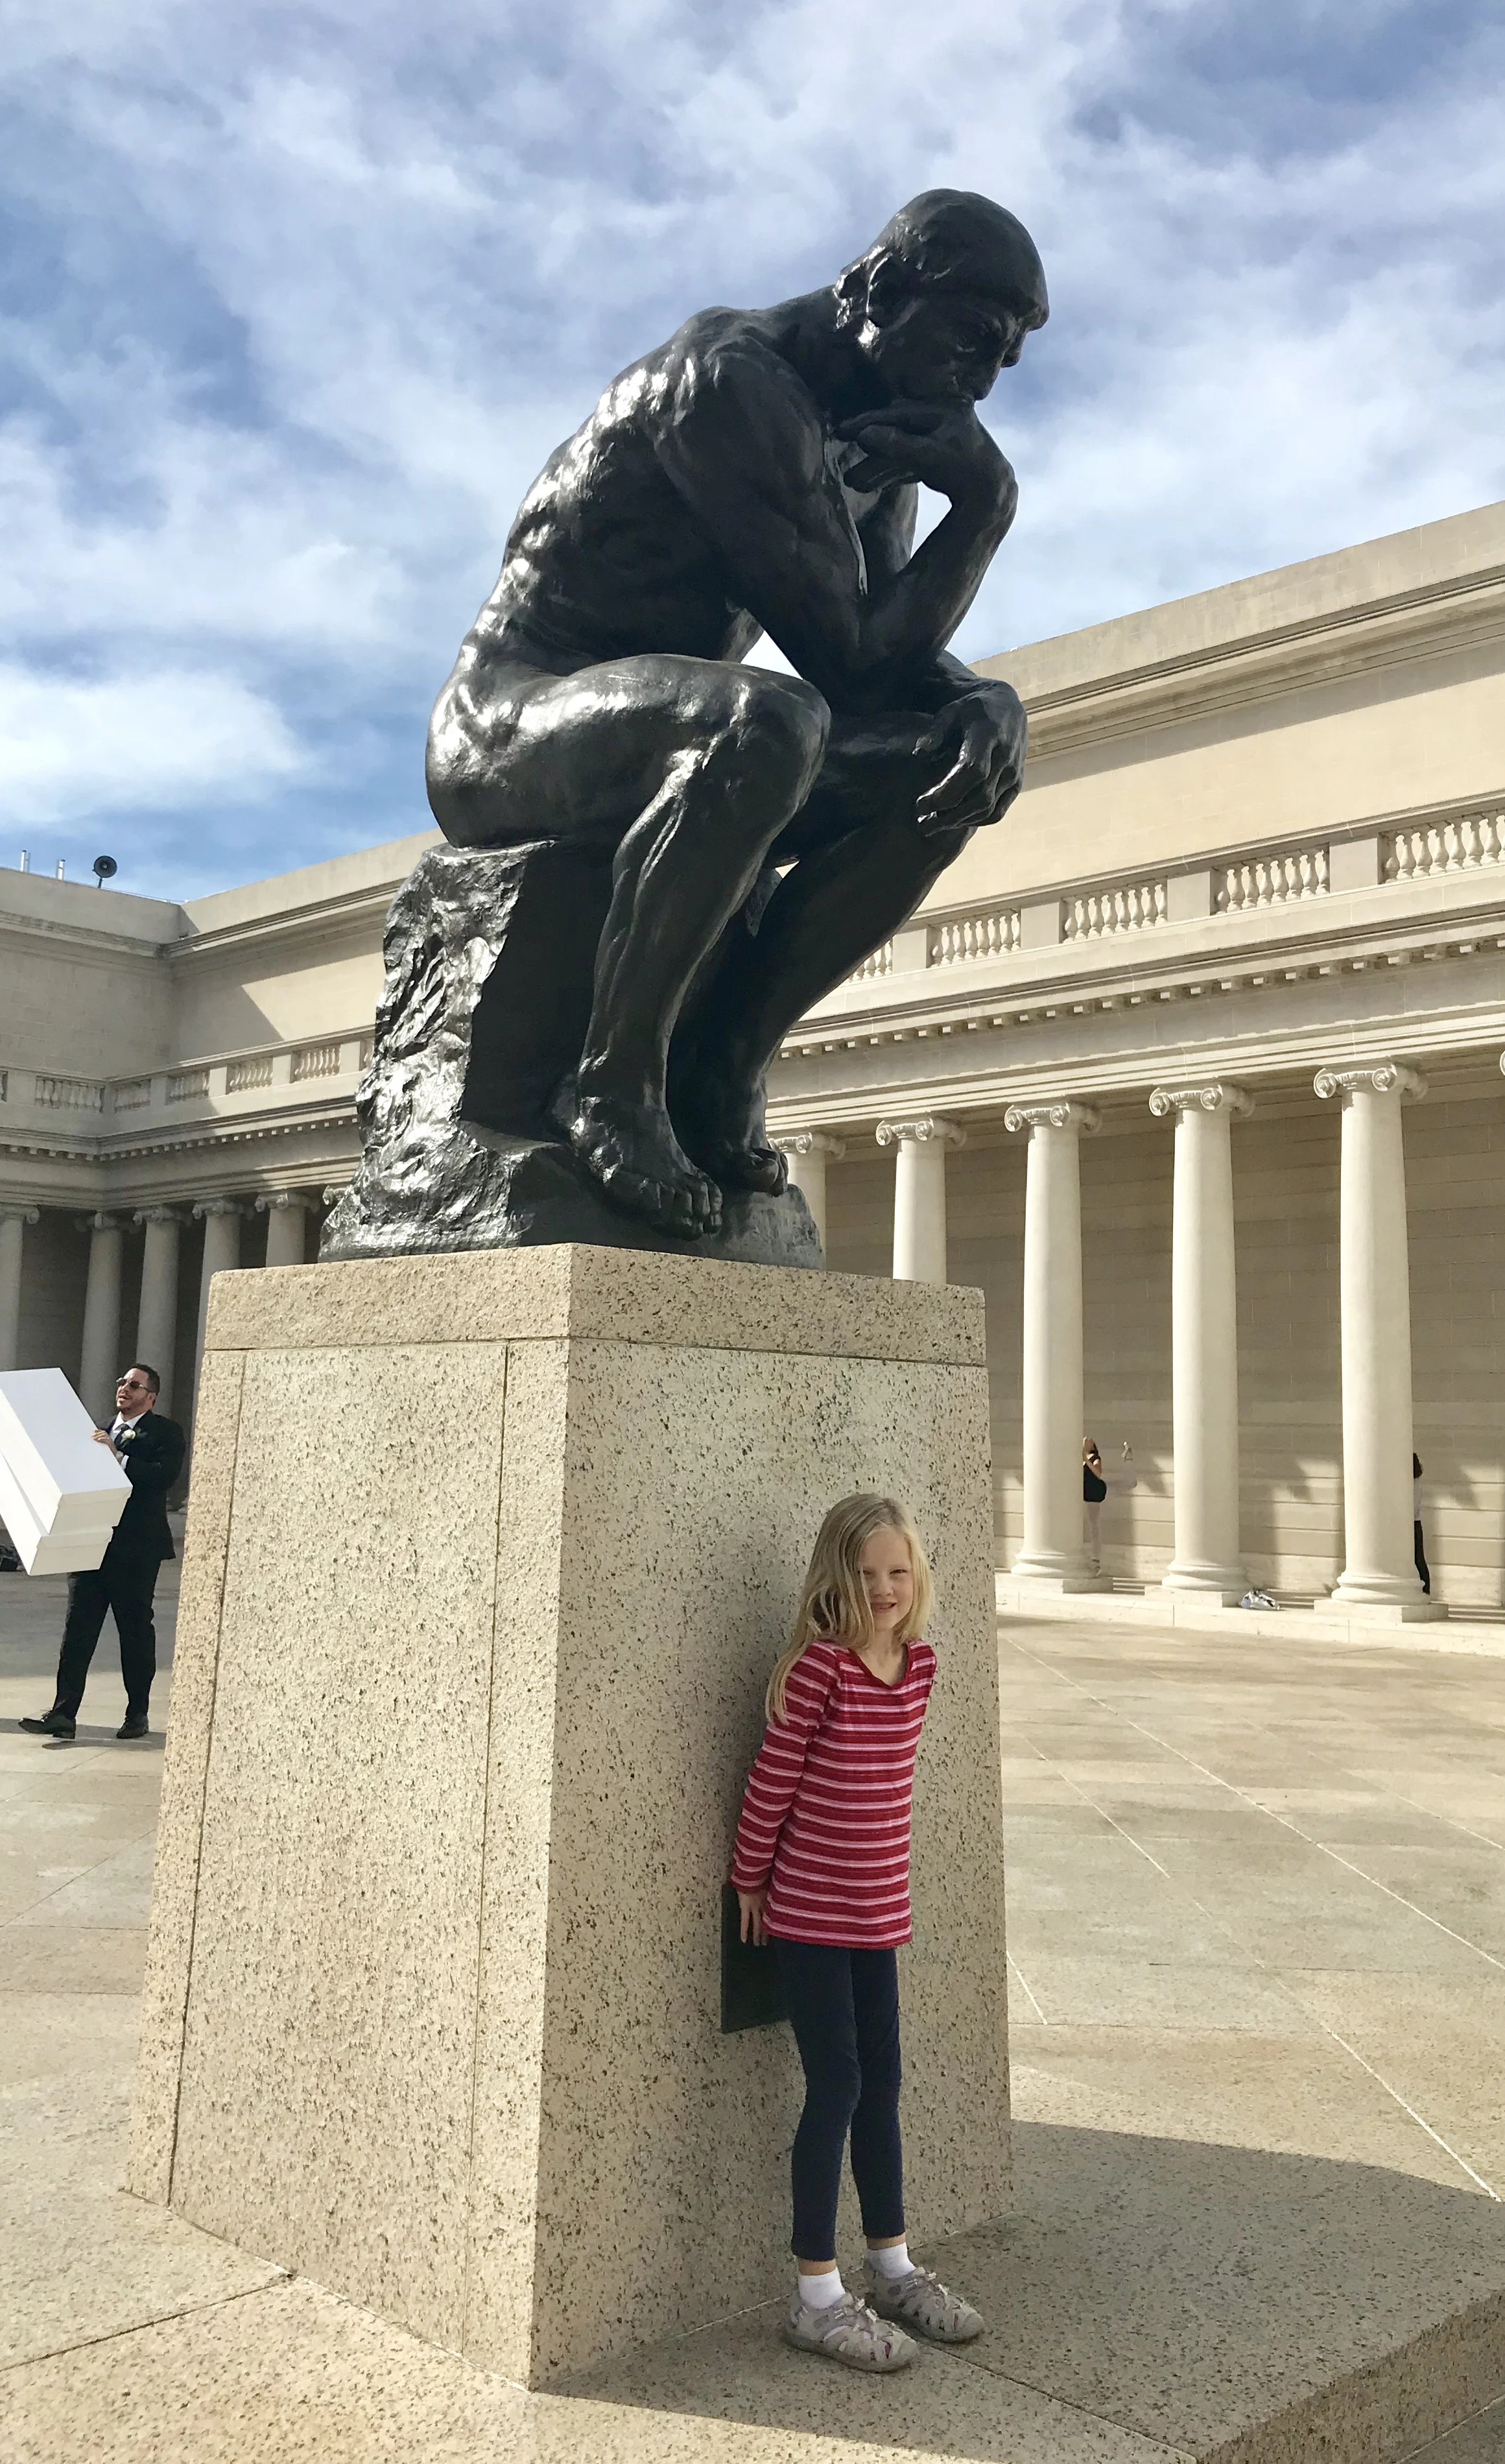 Rodin's world-famous sculpture "The Thinker" at the Legion of Honor